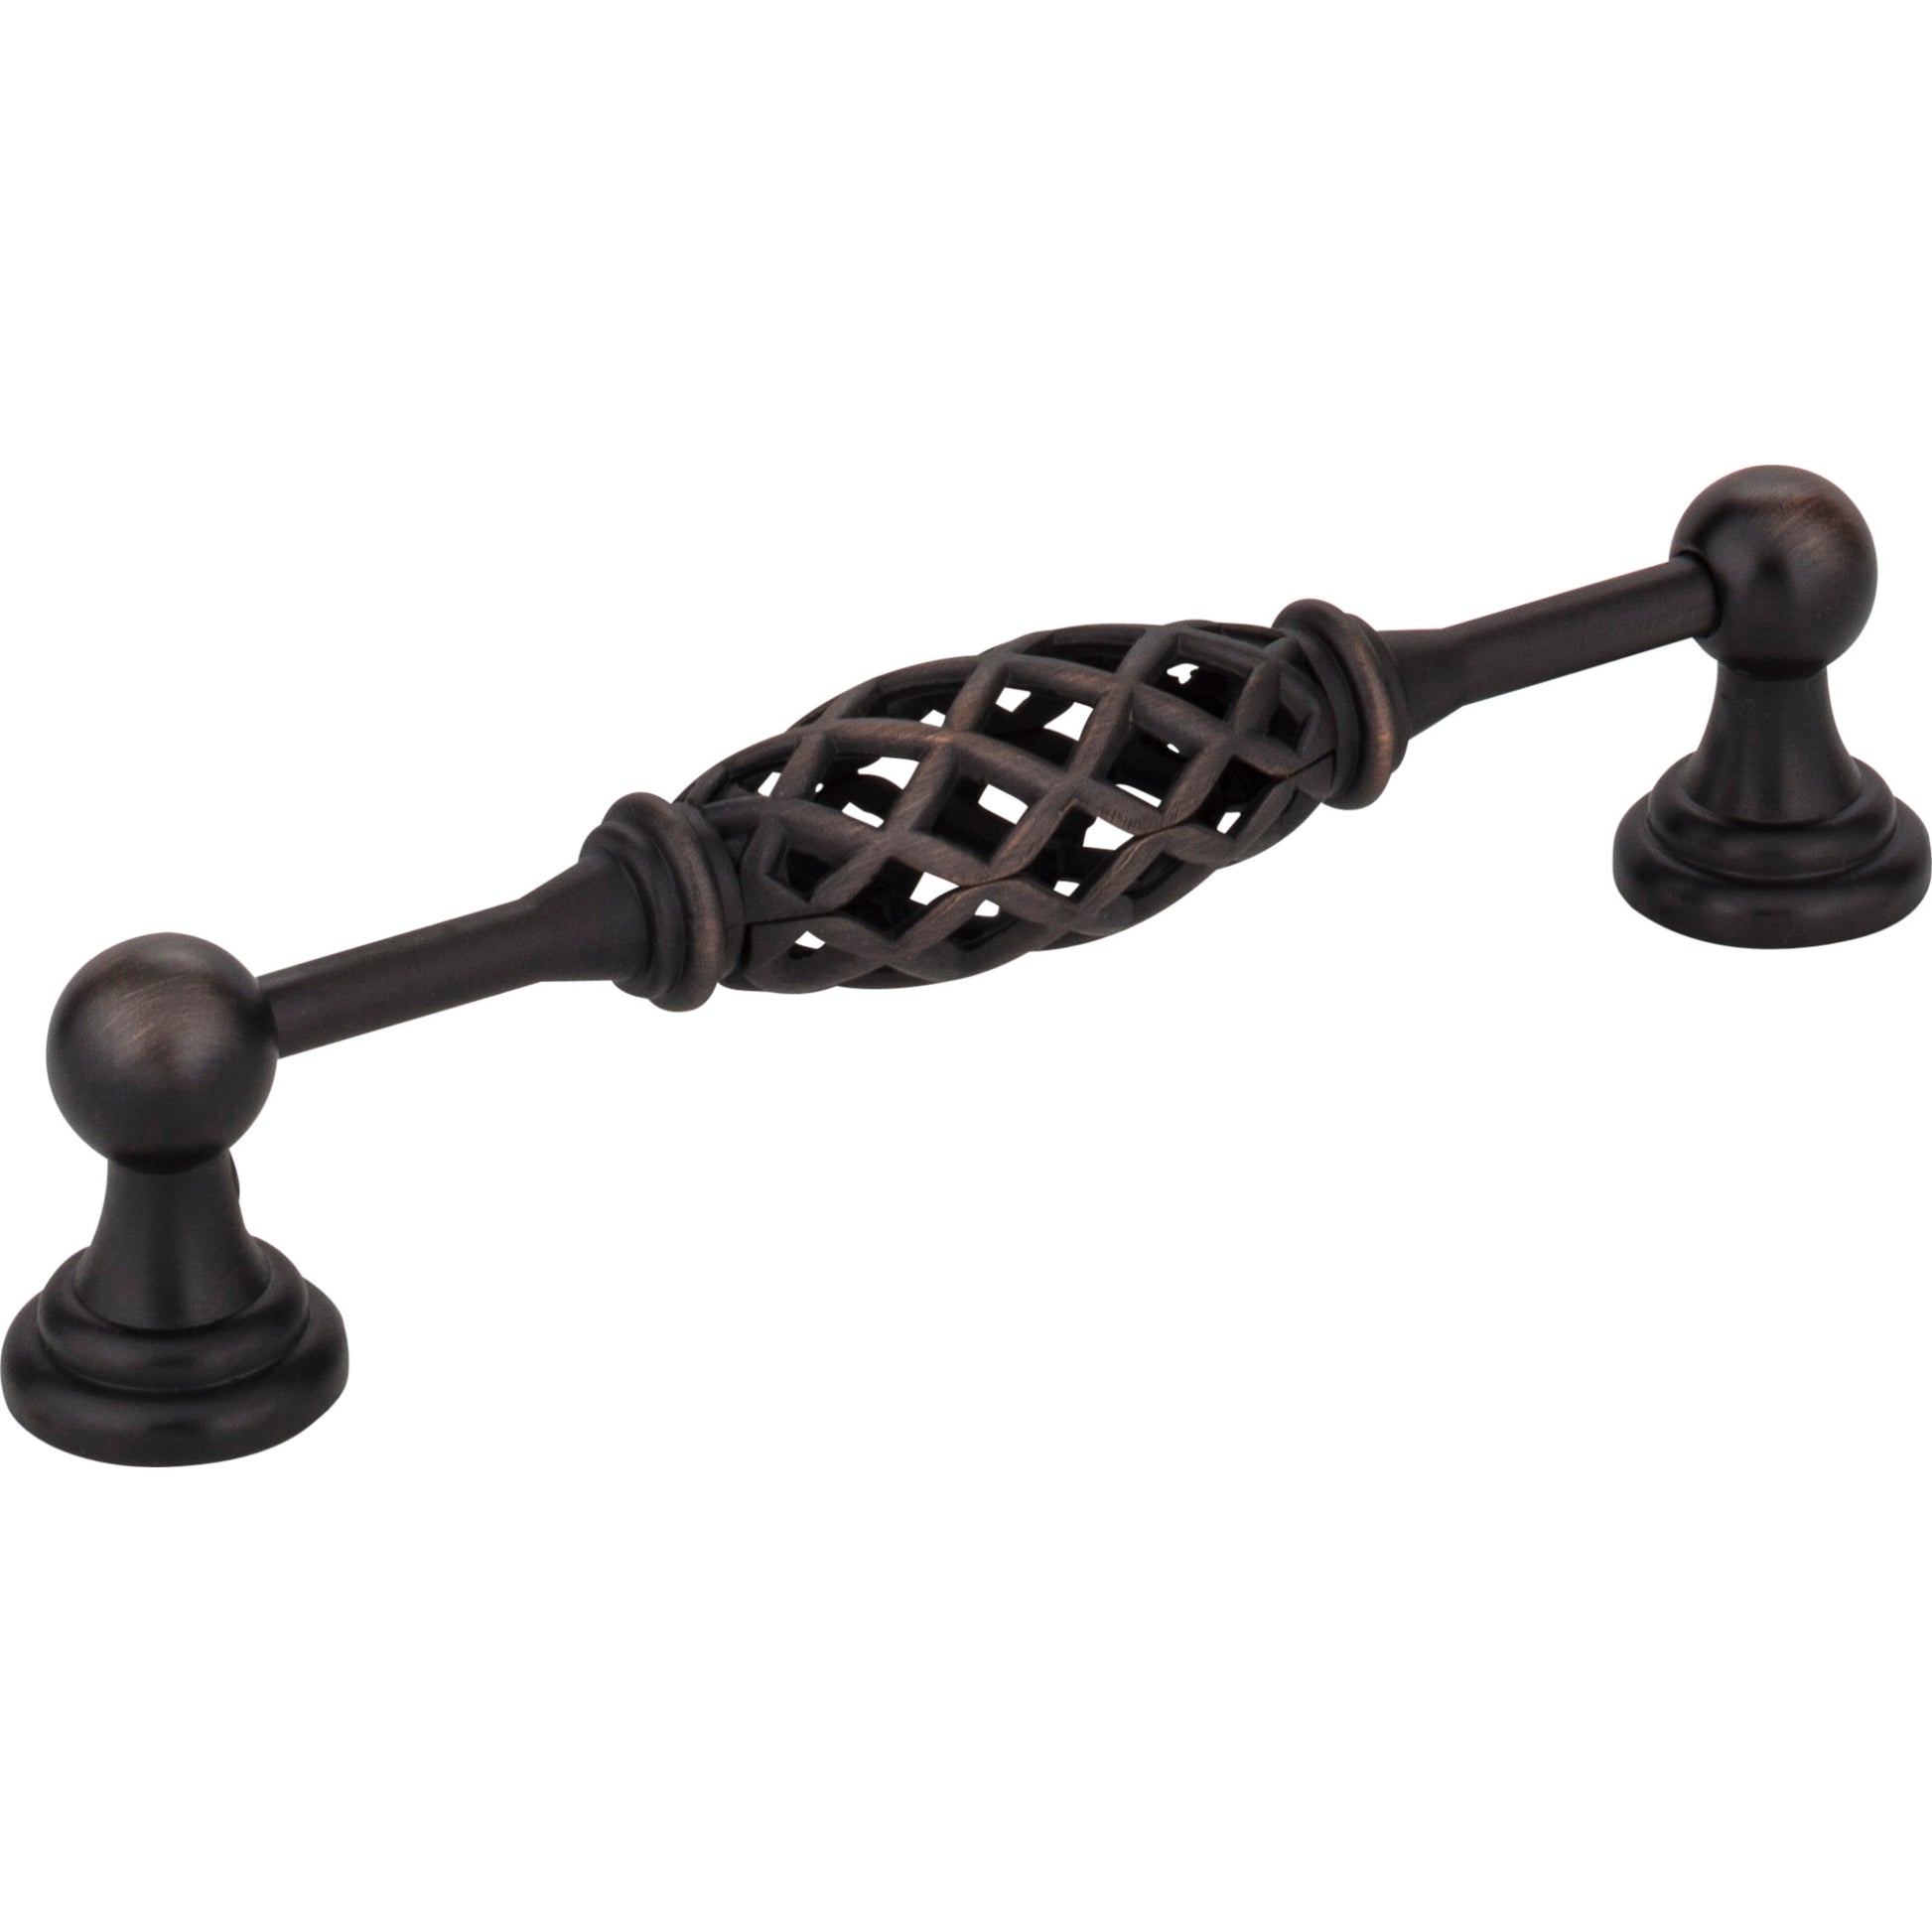 JEFFREY ALEXANDER 749-128B-DBAC 128 mm Center-to-Center Brushed Oil Rubbed Bronze Birdcage Tuscany Cabinet Pull